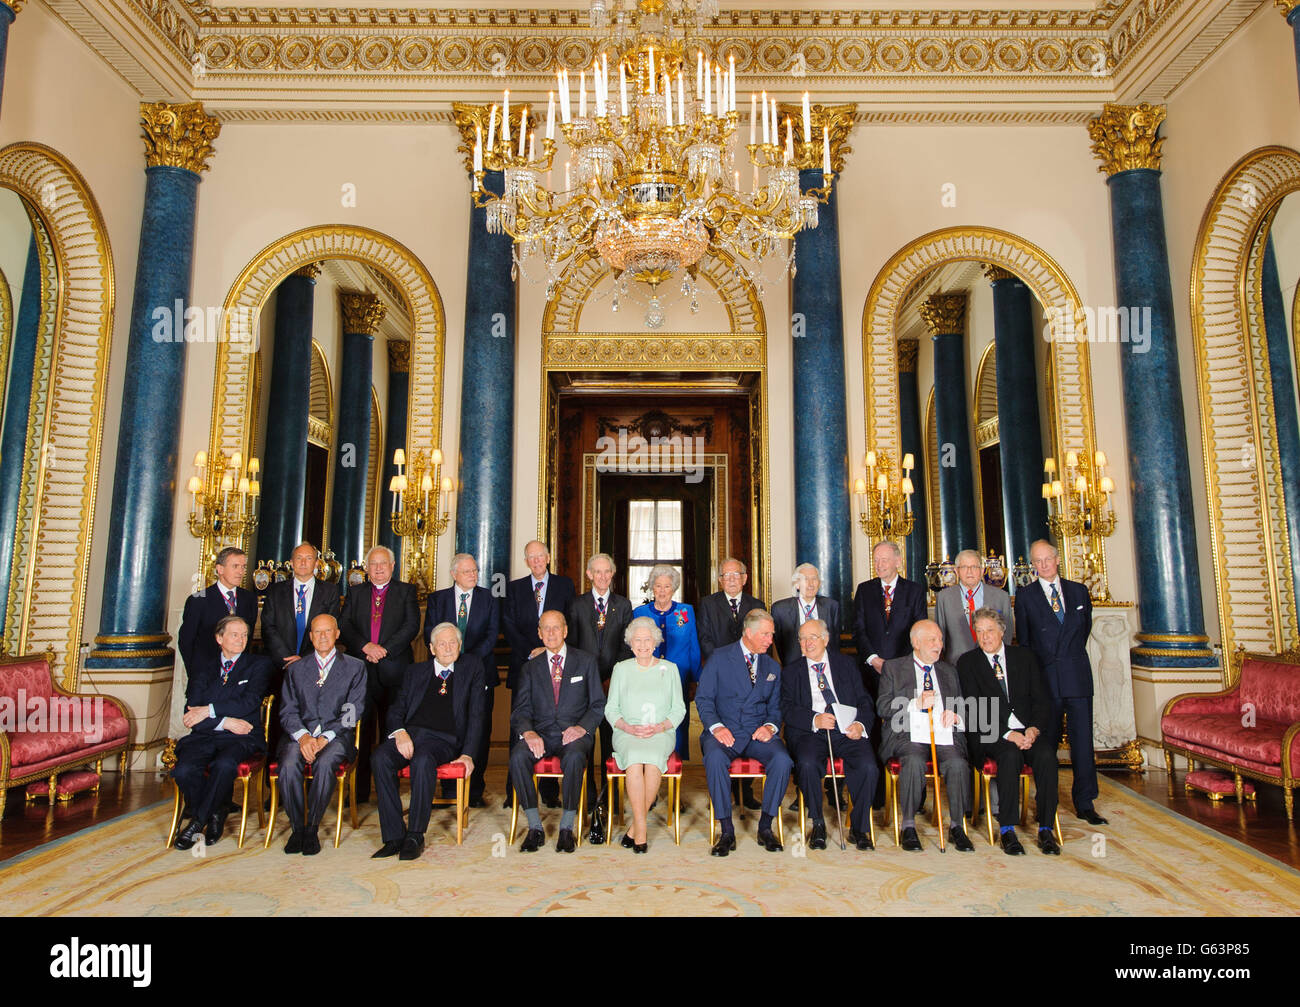 Queen Elizabeth II (front, centre) with members of the Order of Merit (front row left to right) Professor Sir Roger Penrose, Lord Foster of Thames Bank, the Revd. Professor Owen Chadwick, the Duke of Edinburgh, the Prince of Wales, Sir Michael Atiyah, Sir Anthony Caro, Sir Tom Stoppard (back row, left to right) Neil MacGregor, Sir Tim Berners-Lee, Lord Eames, Sir David Attenborough, Lord Rothschild, Lord May of Oxford, Baroness Boothroyd, Professor Sir Michael Howard, Lord Rees of Ludlow, the Right Honourable Jean Chretien, David Hockney and Lord Fellowes, in the Music Room, at Buckingham Stock Photo